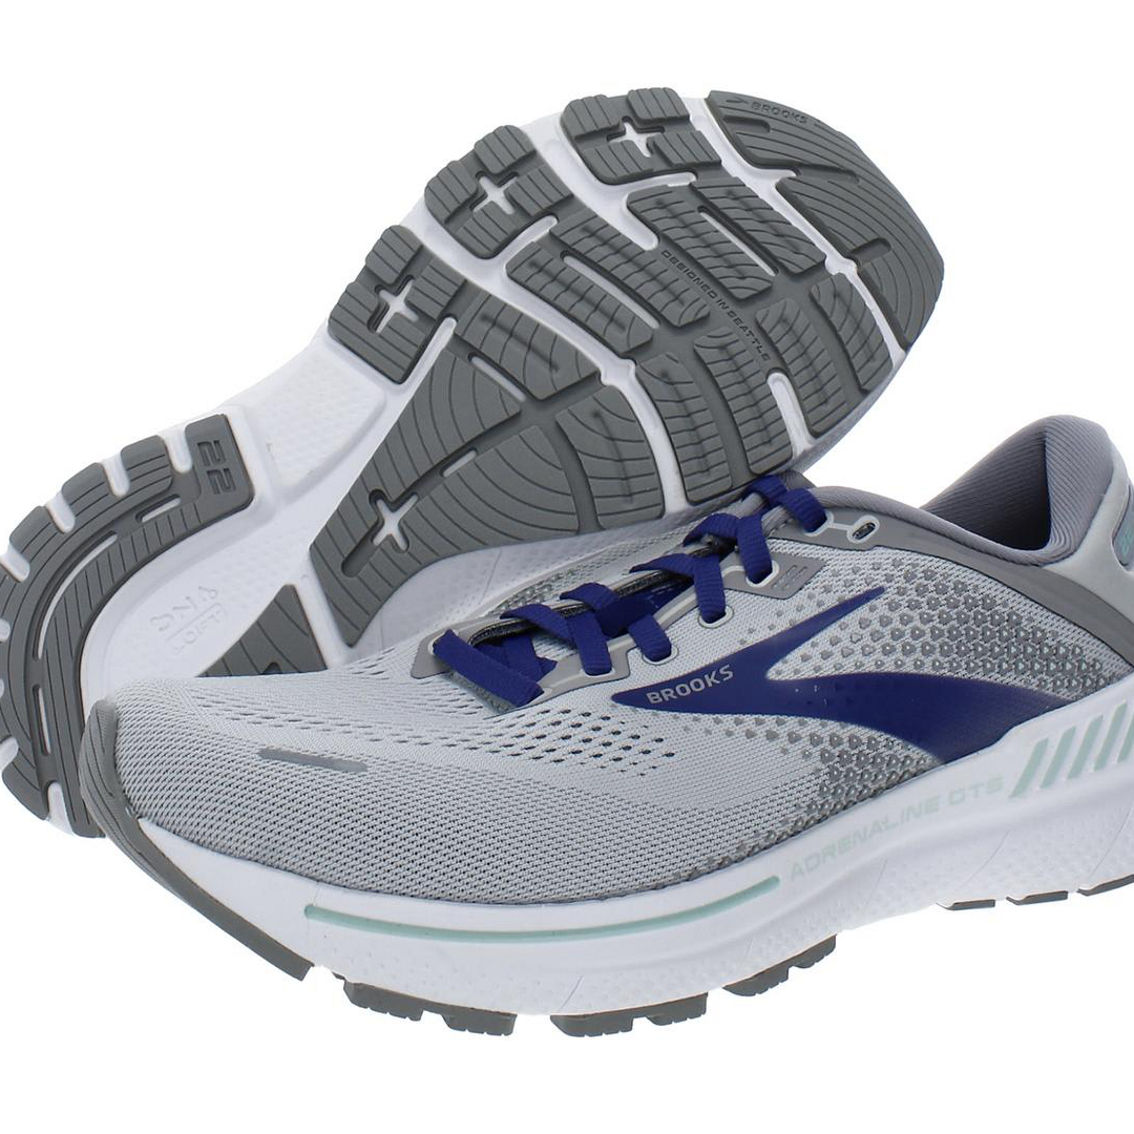 Adrenaline GTS 22 Womens Workout Fitness Athletic and Training Shoes - Image 2 of 5